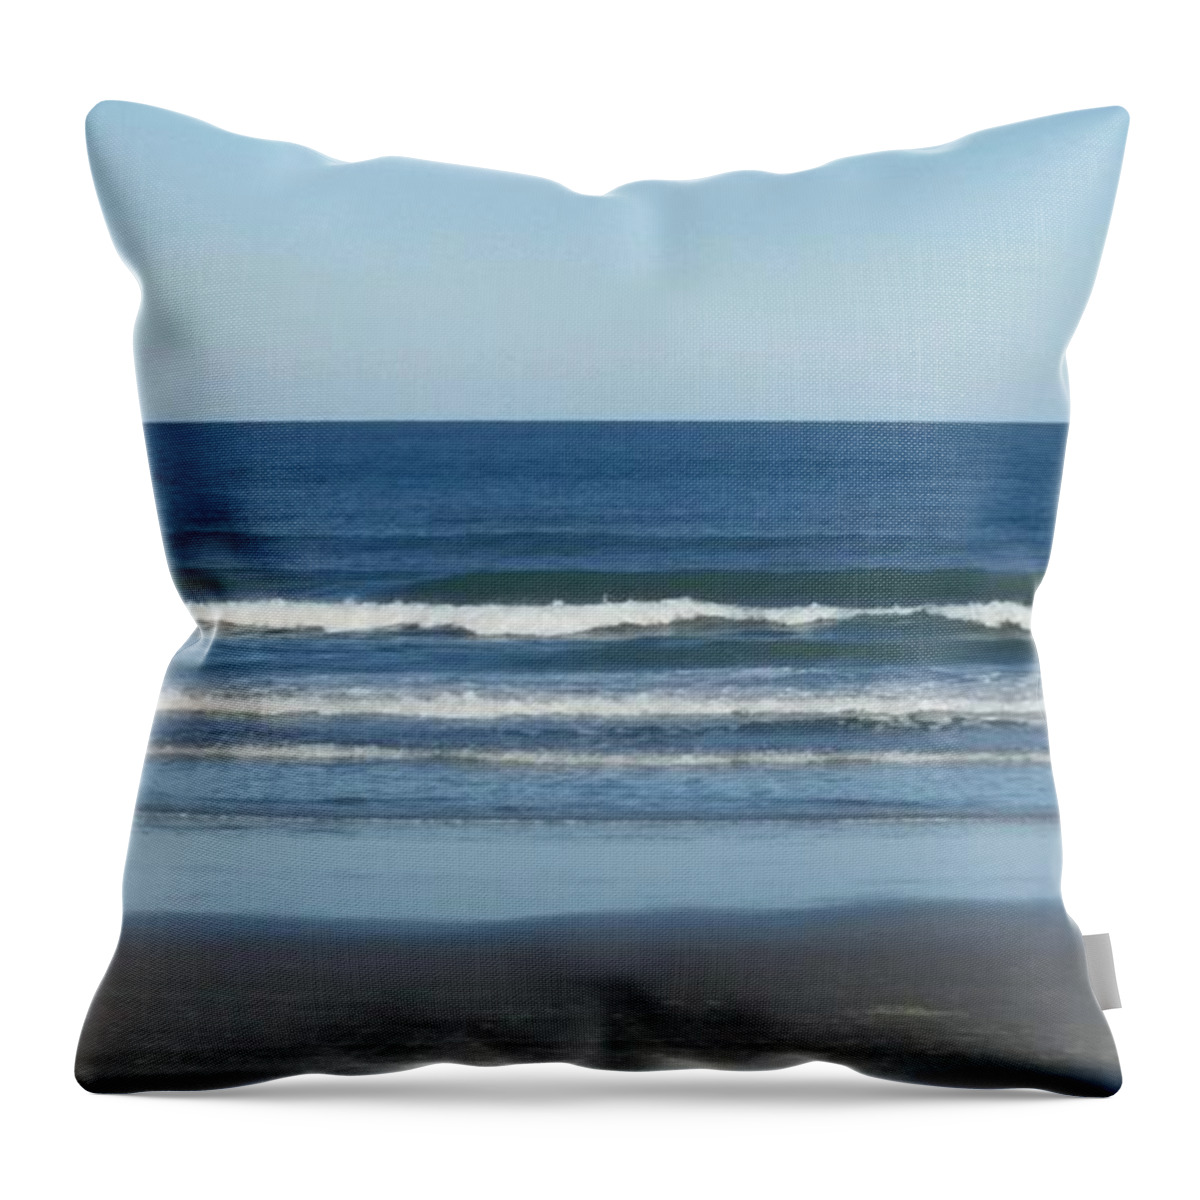 Water Throw Pillow featuring the photograph Waves by Jimmy Clark